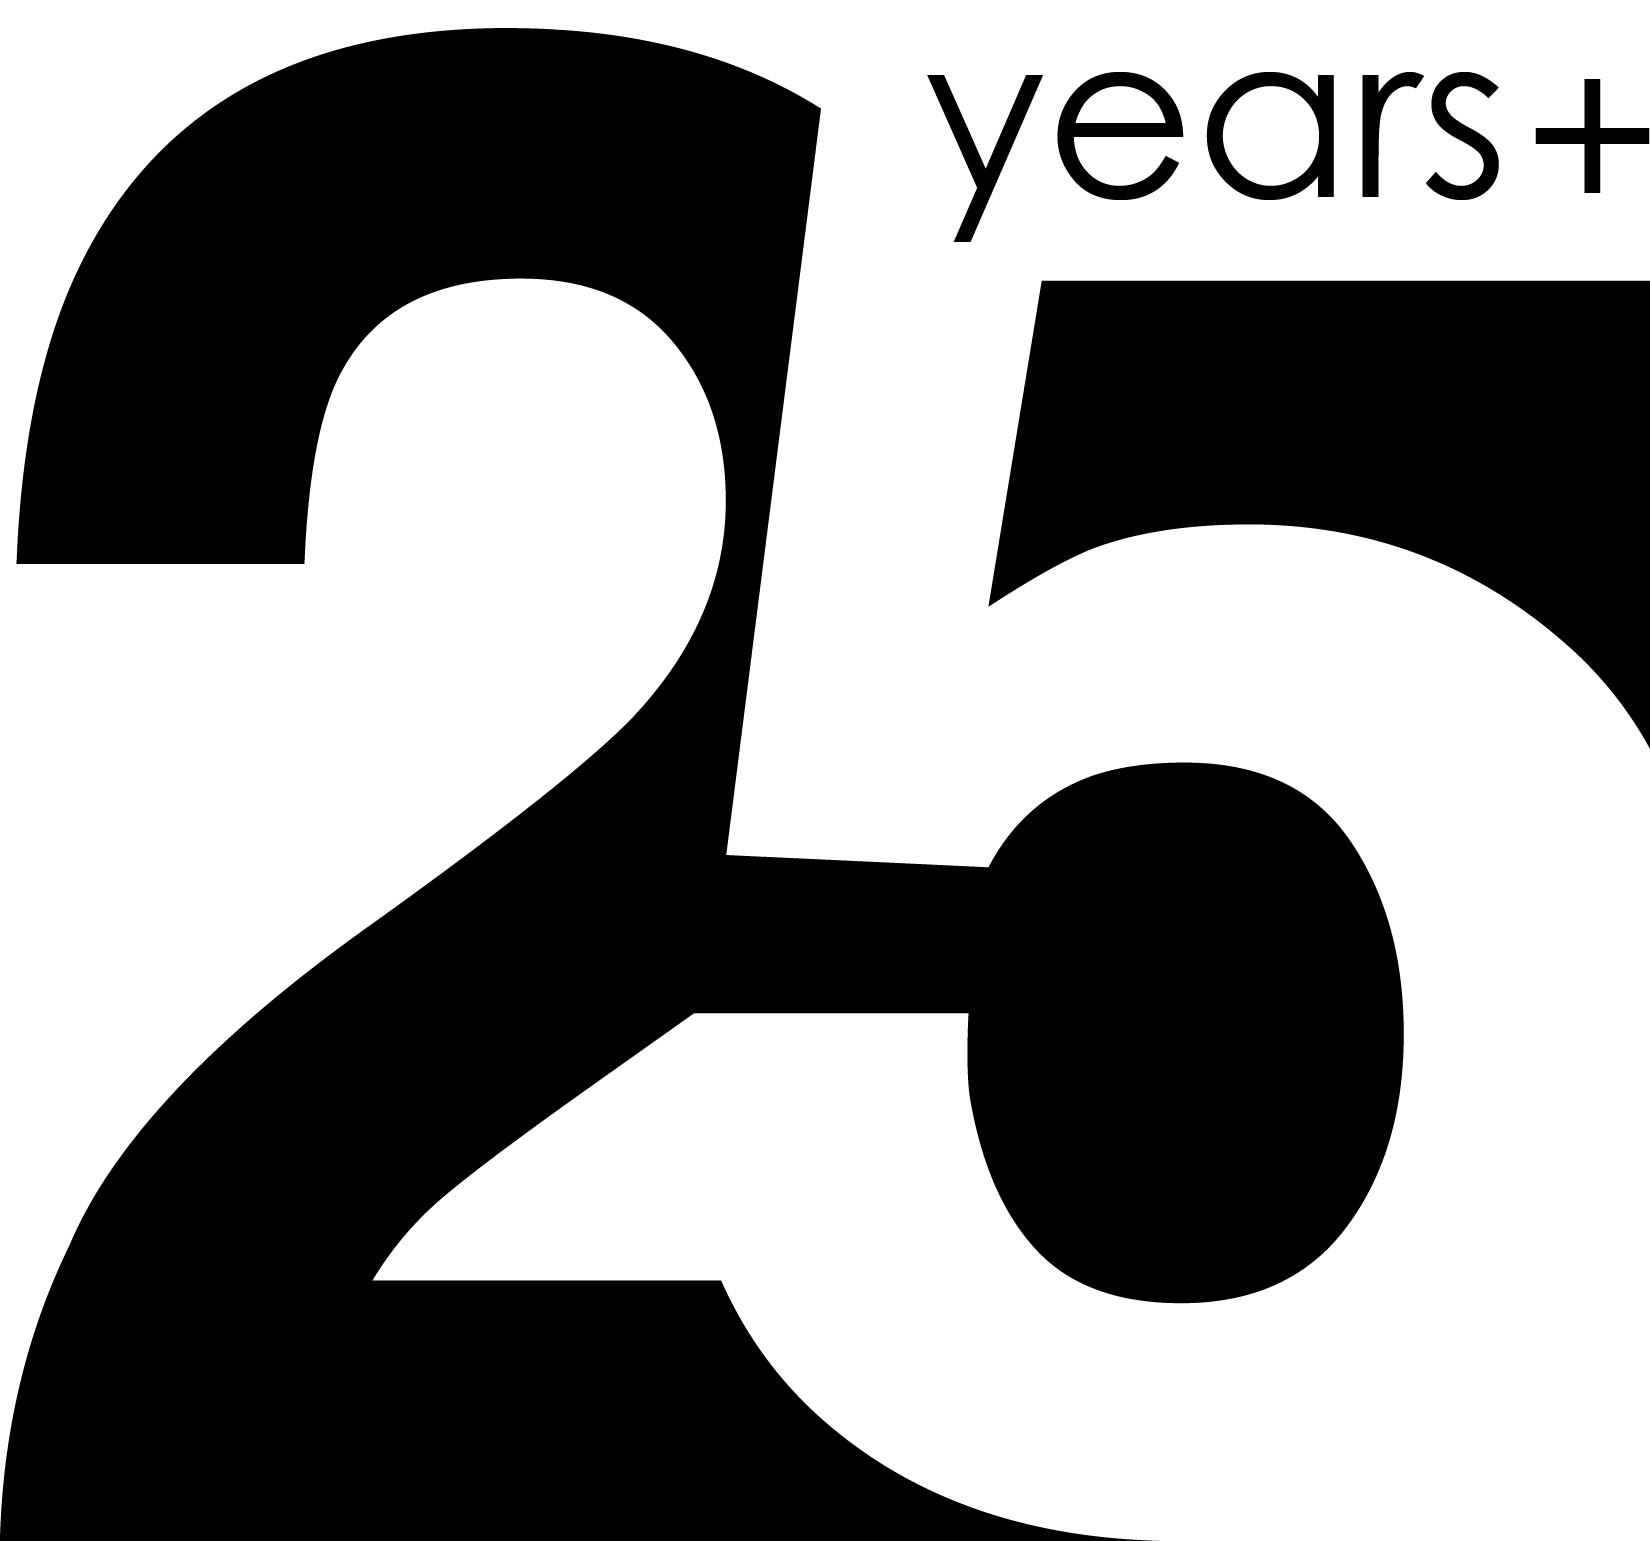 25years + serving the height safety industry